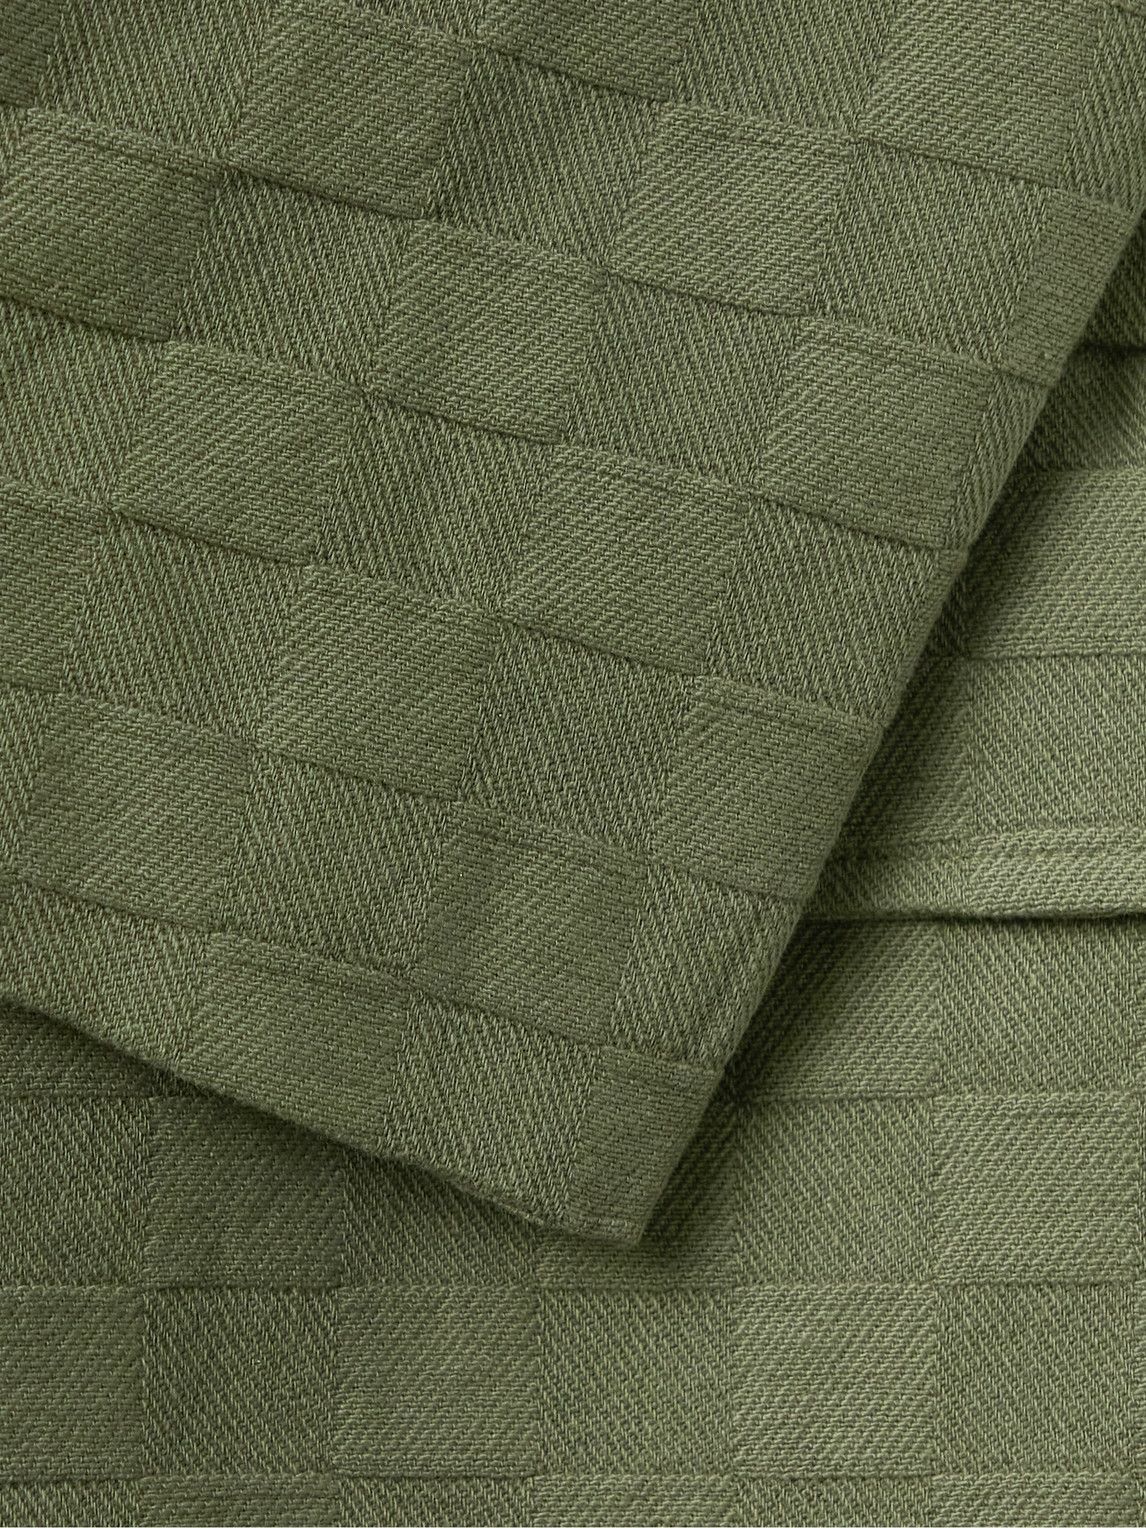 GENERAL ADMISSION - Checked Cotton-Twill Jacquard Suit Jacket - Green ...